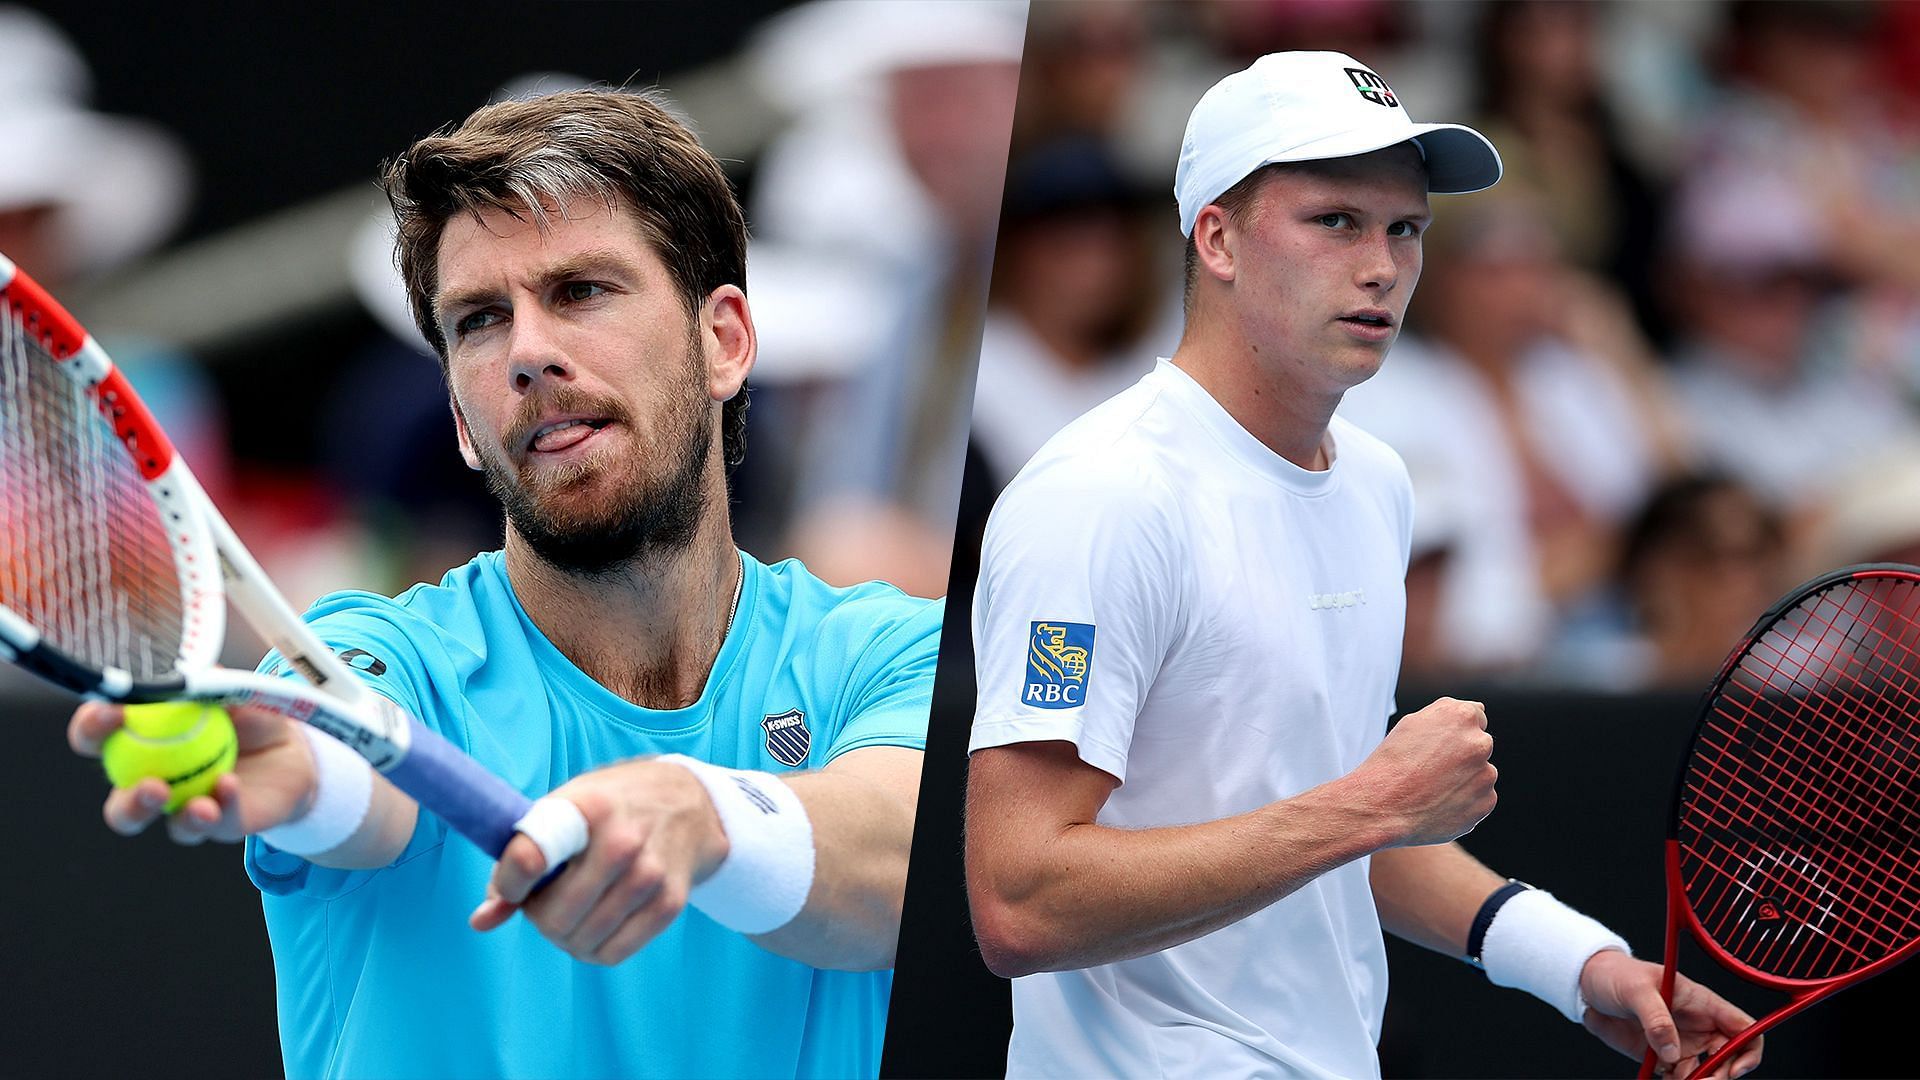 ASB Classic 2023: Cameron Norrie vs Jenson Brooksby preview, head-to-head, prediction, odds and pick